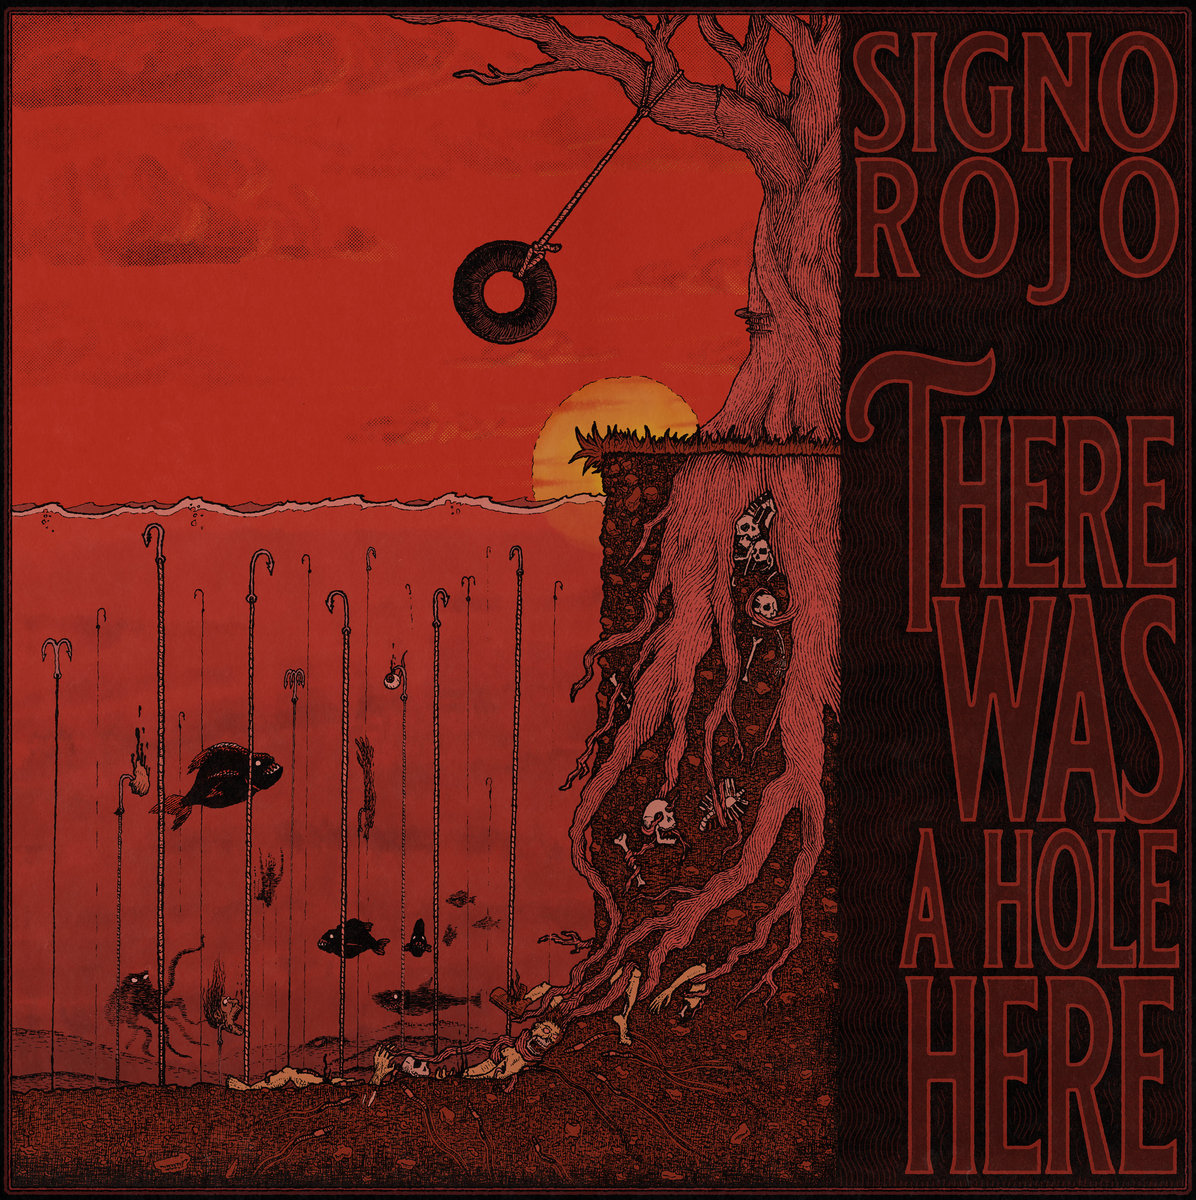 Kvarter Munk Vil have Outlaws Of The Sun: Signo Rojo - There Was A Hole Here (Album Review)